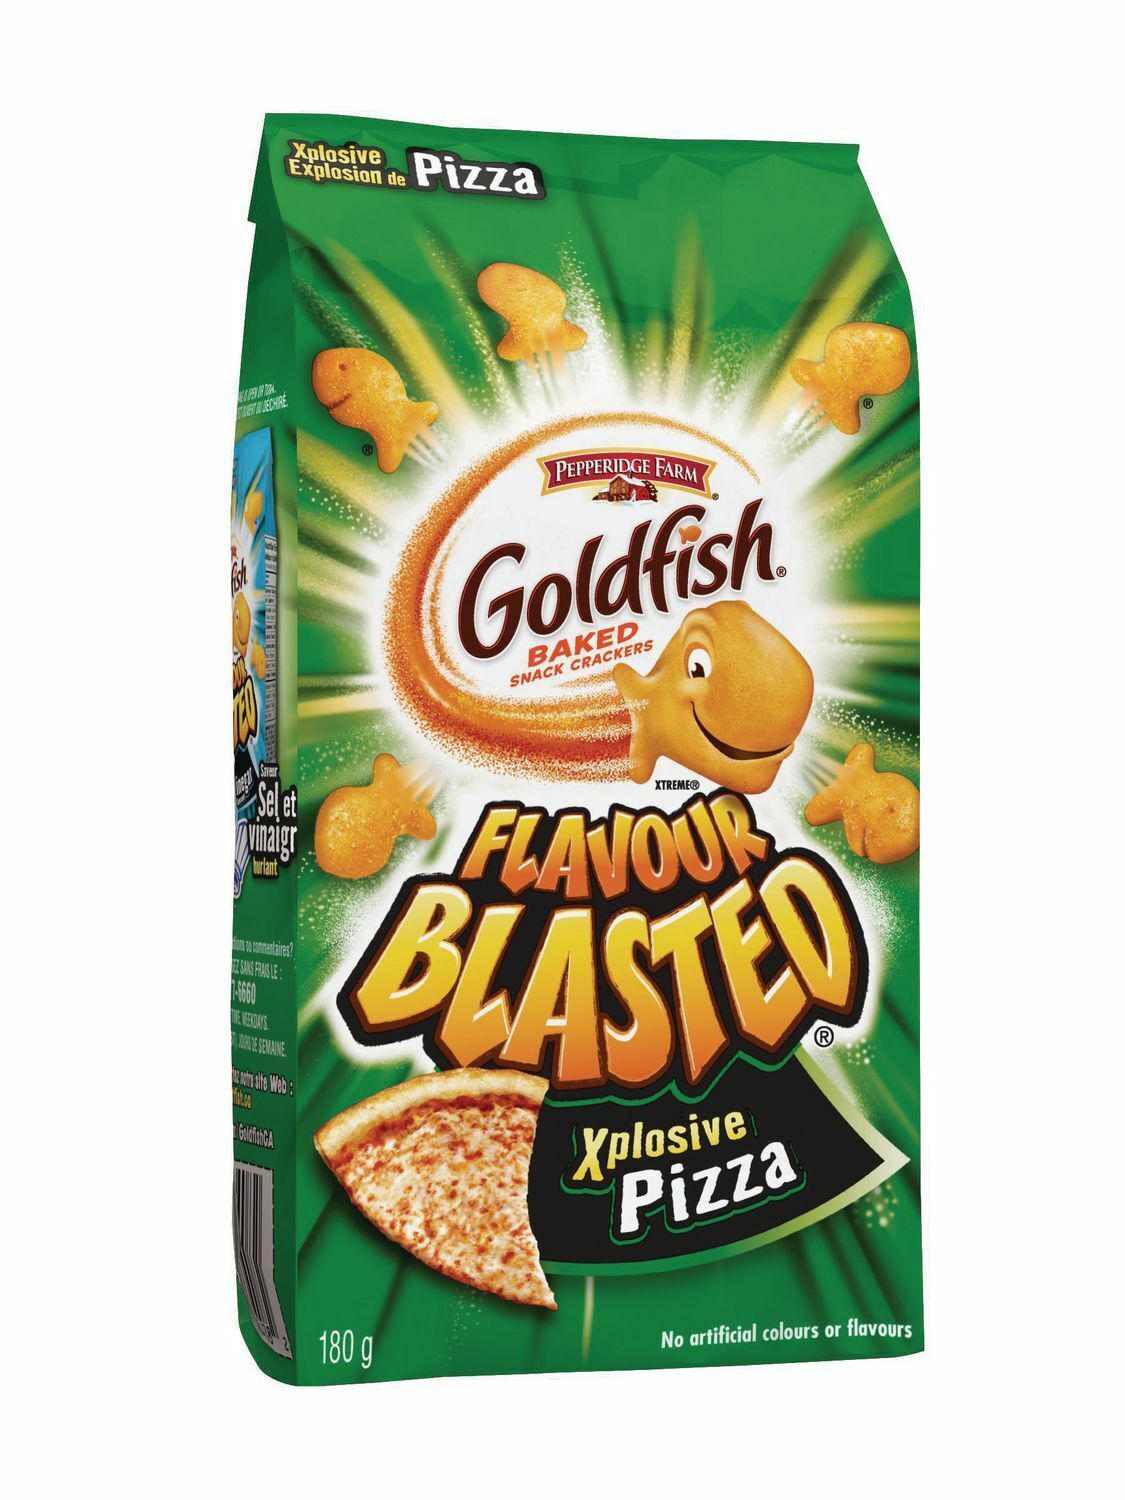 3 bags Goldfish Flavour Blasted Explosive Pizza Crackers180gEach Free Shipping - £21.31 GBP